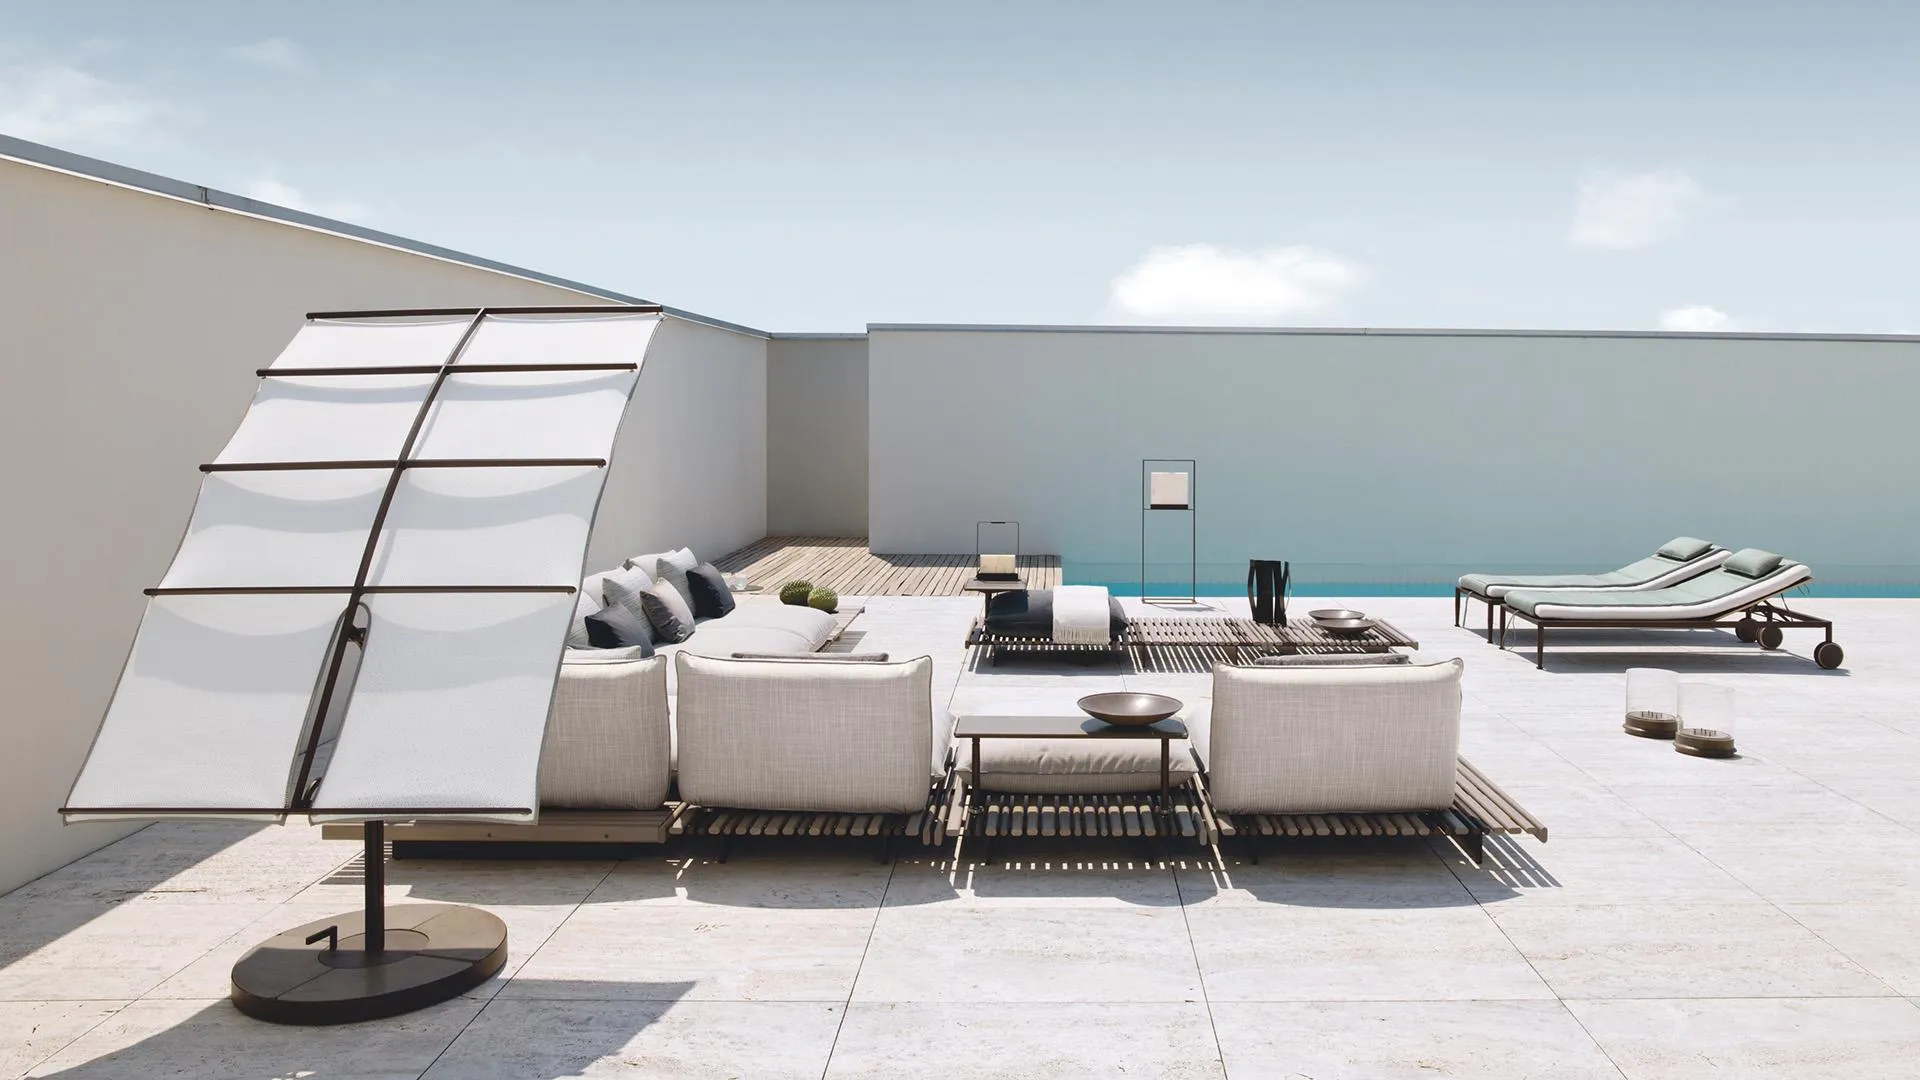 Gea parasol by Giorgetti on a rooftop